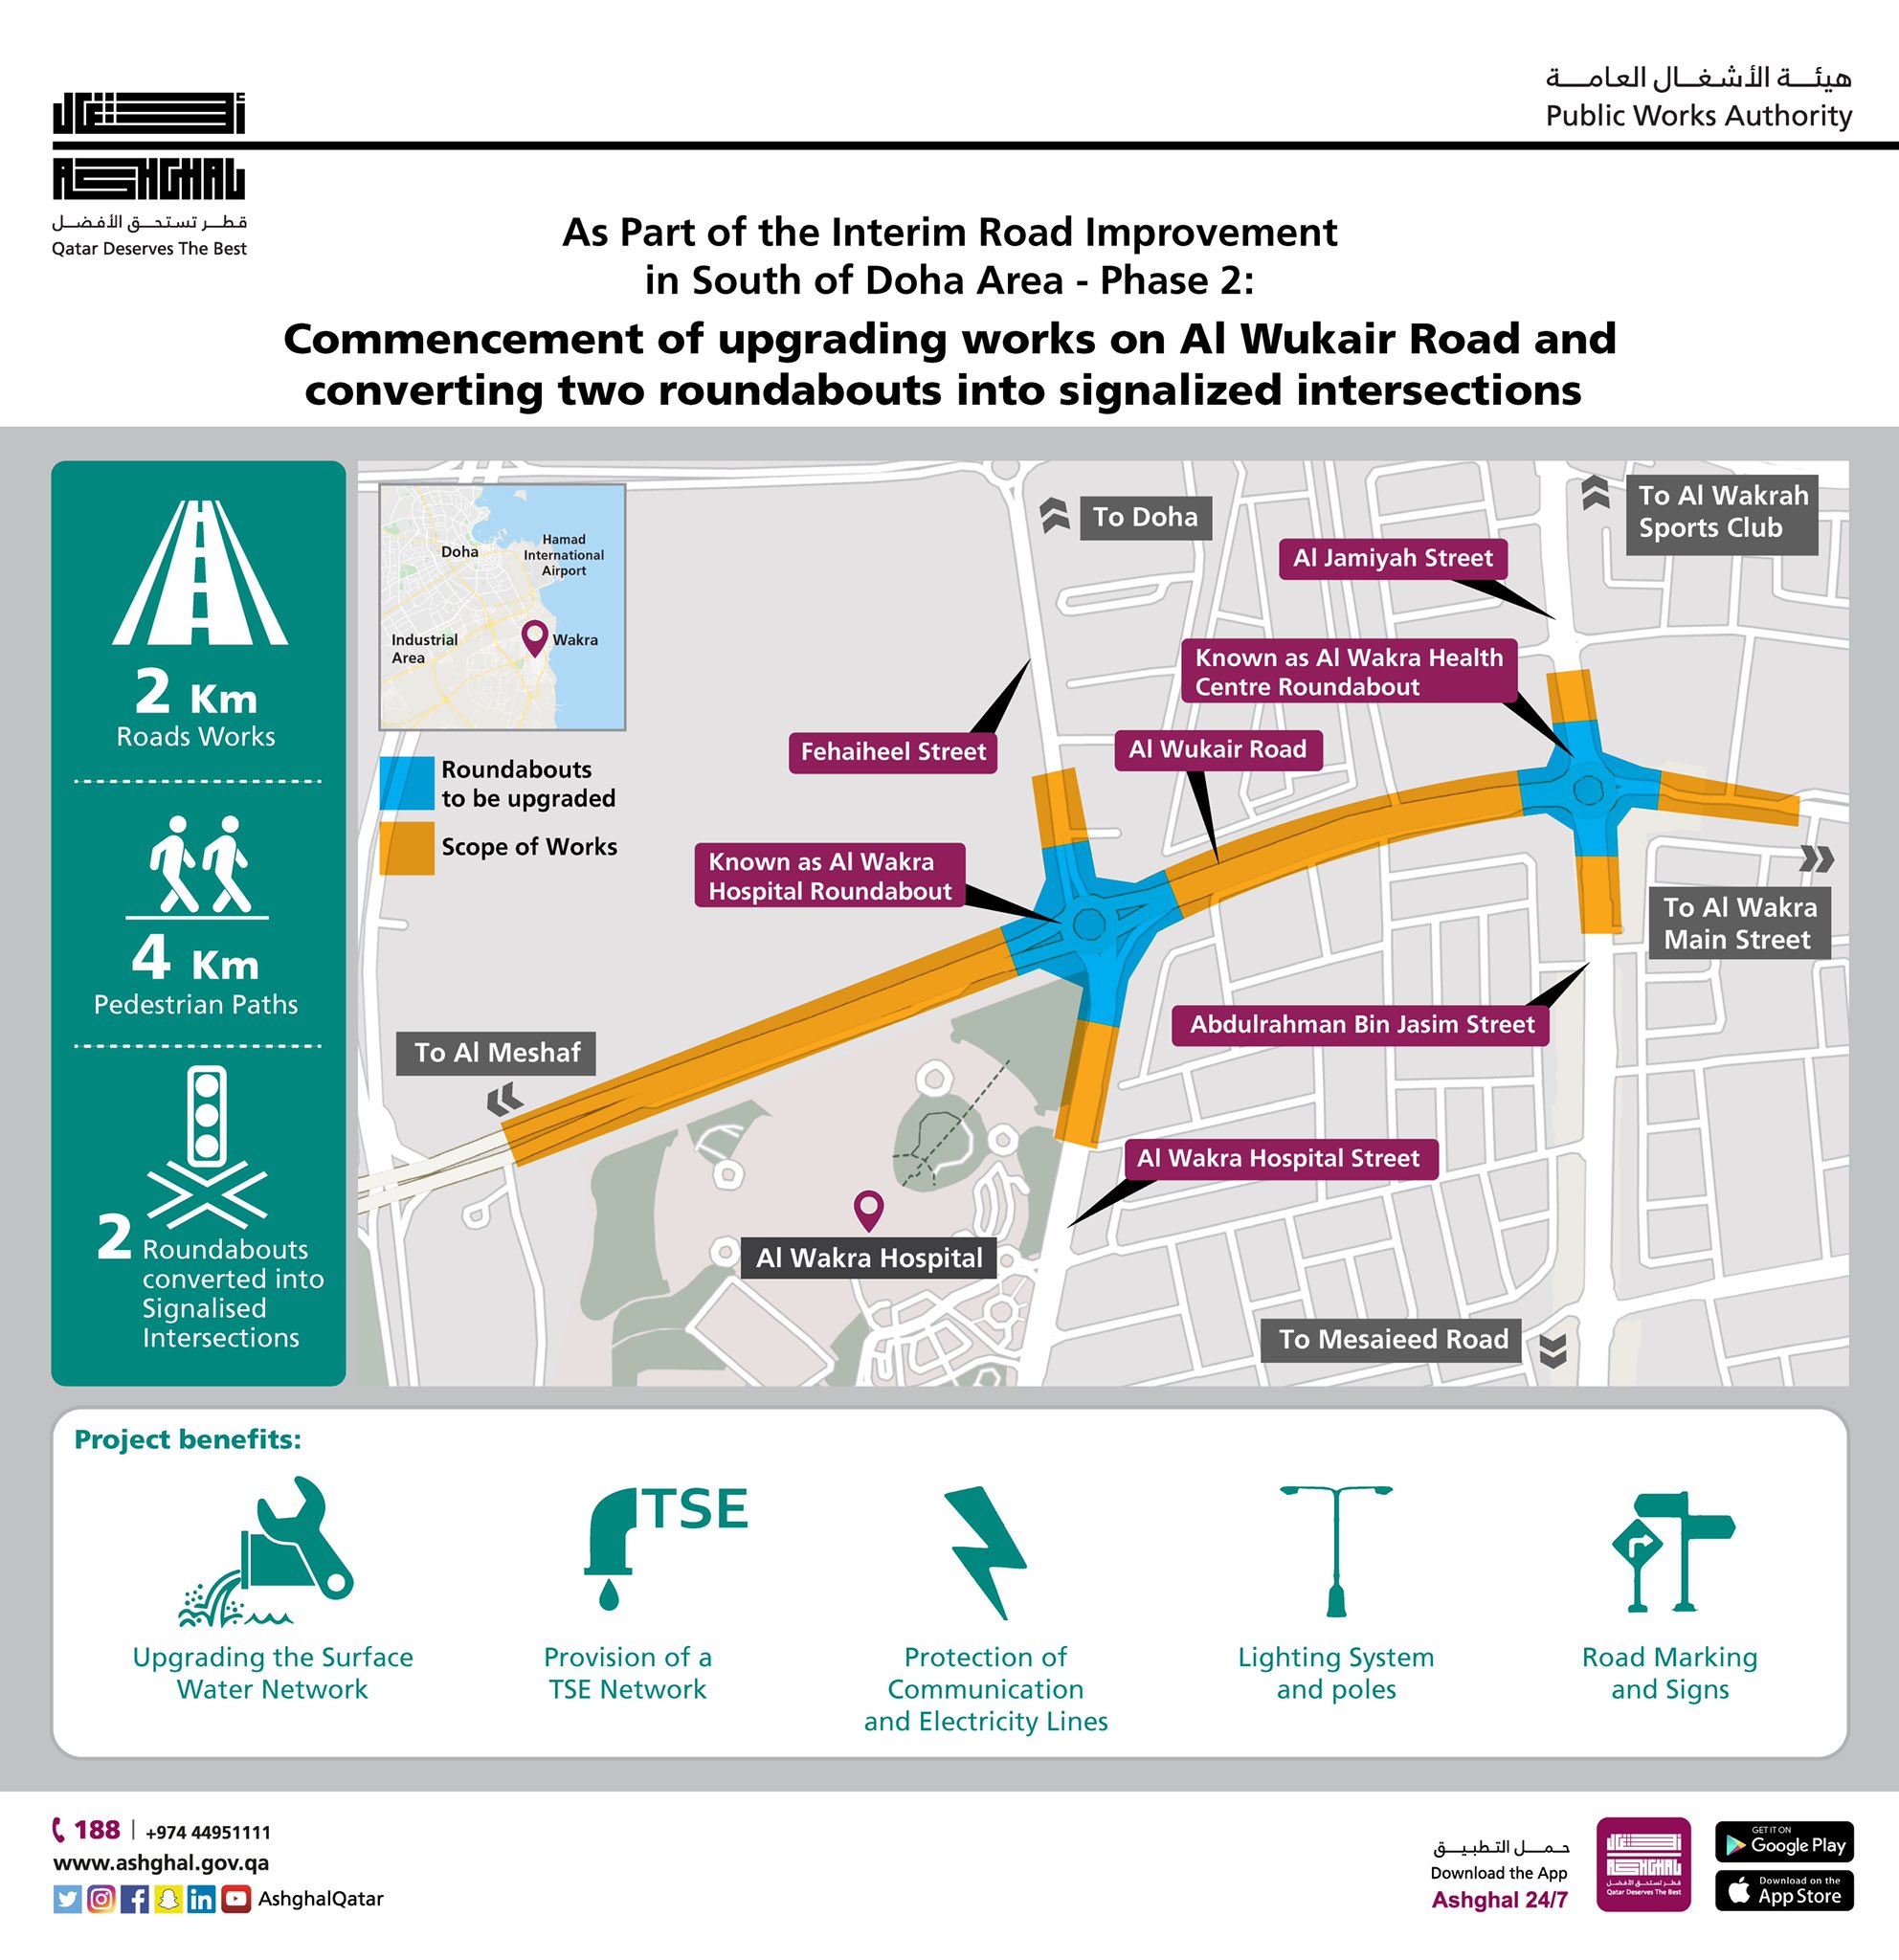 Second Phase of Upgrading Works on Al Wukair Road Commences